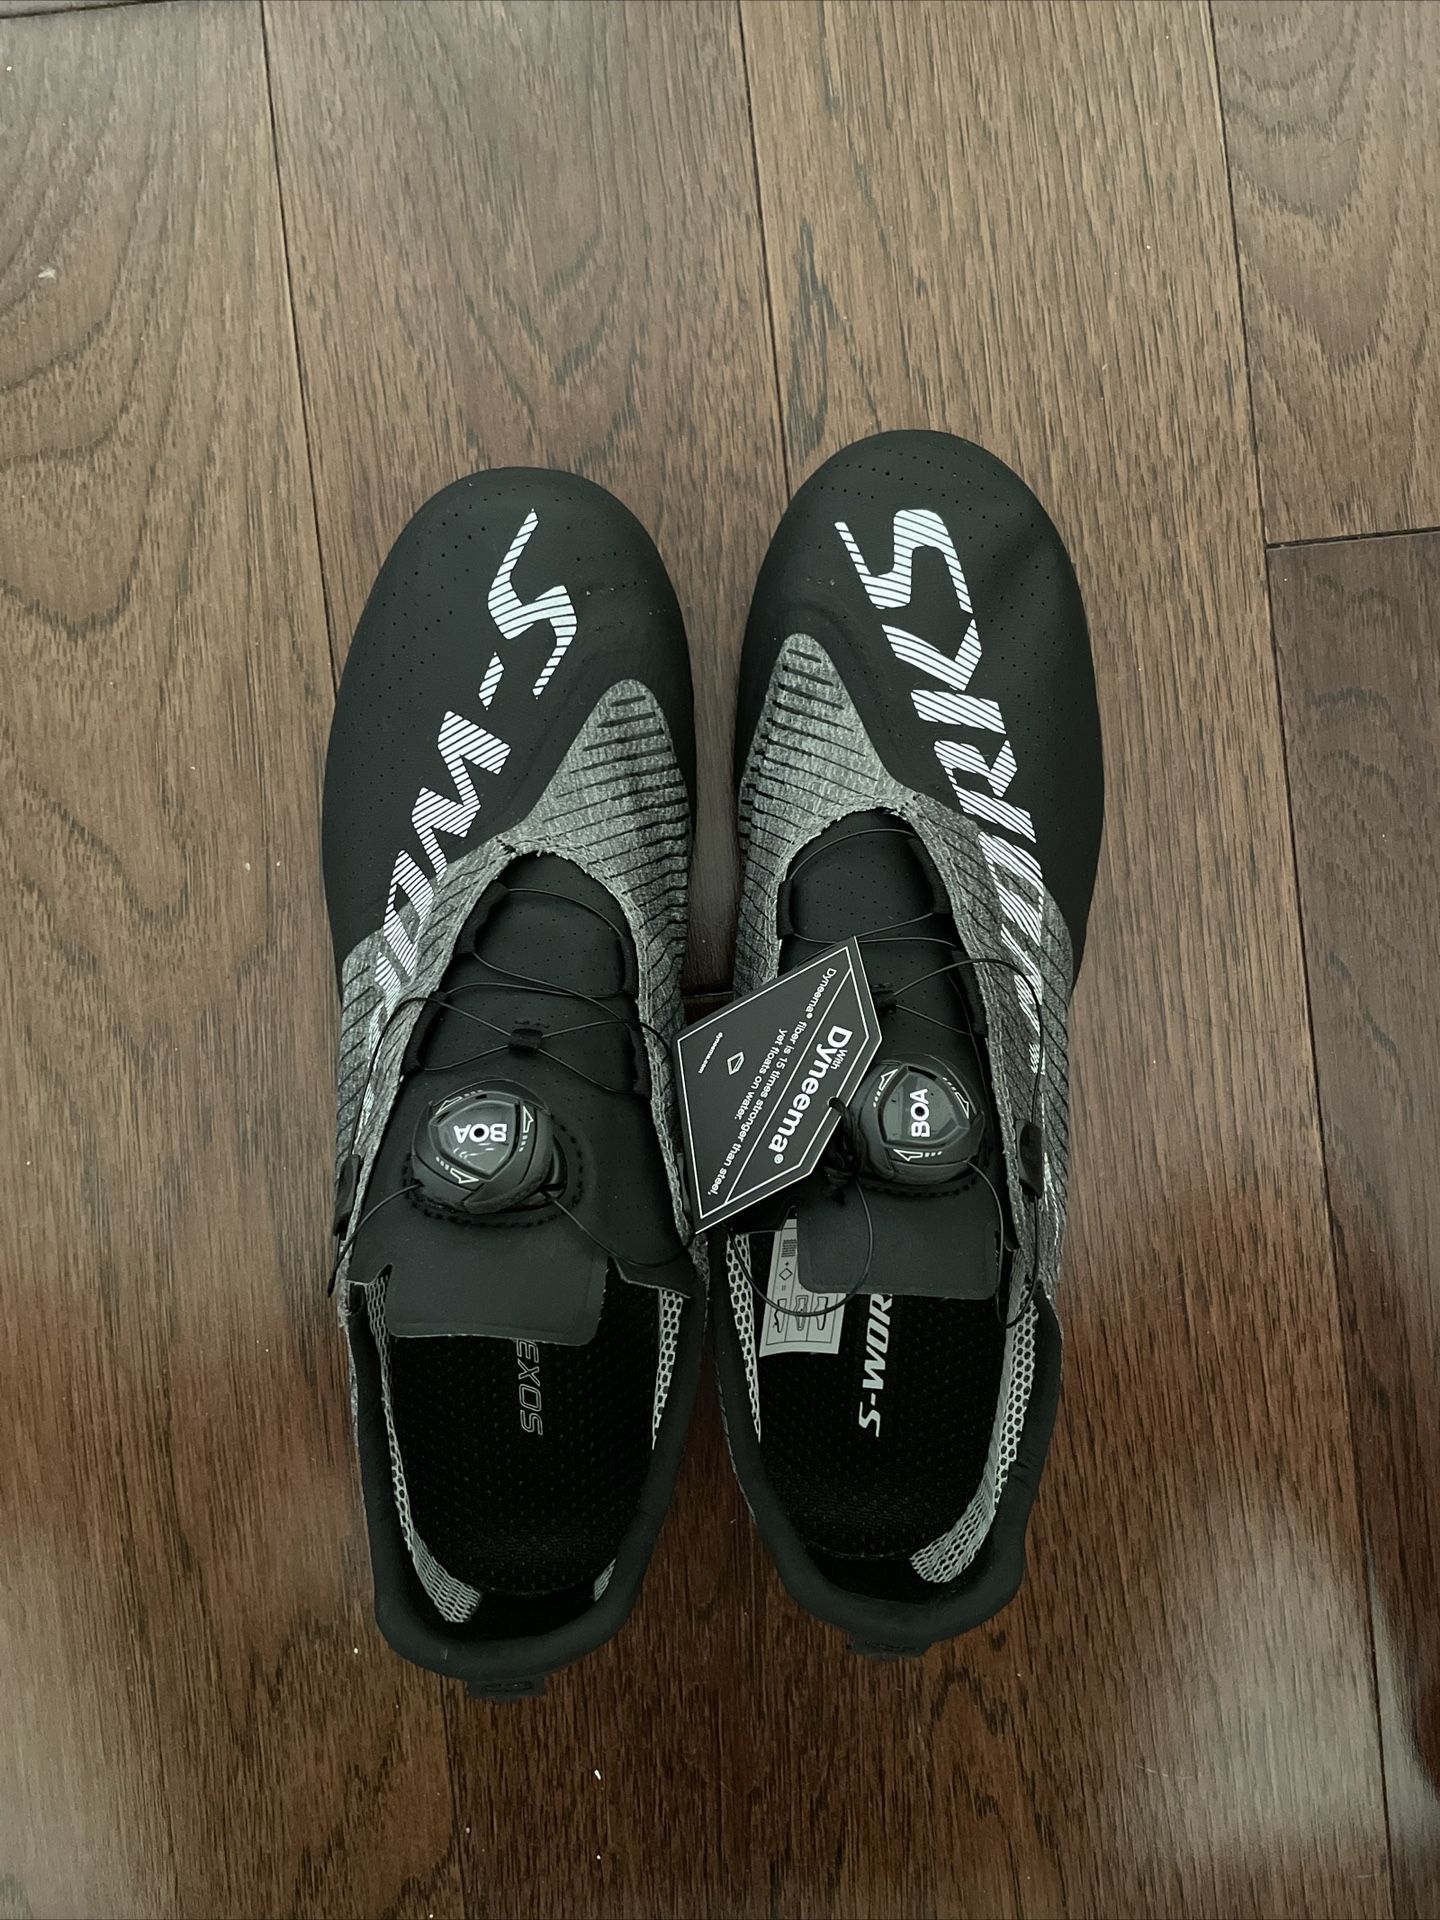 S-works EXOS Road Shoes - Size 44 EU | 10.5 US